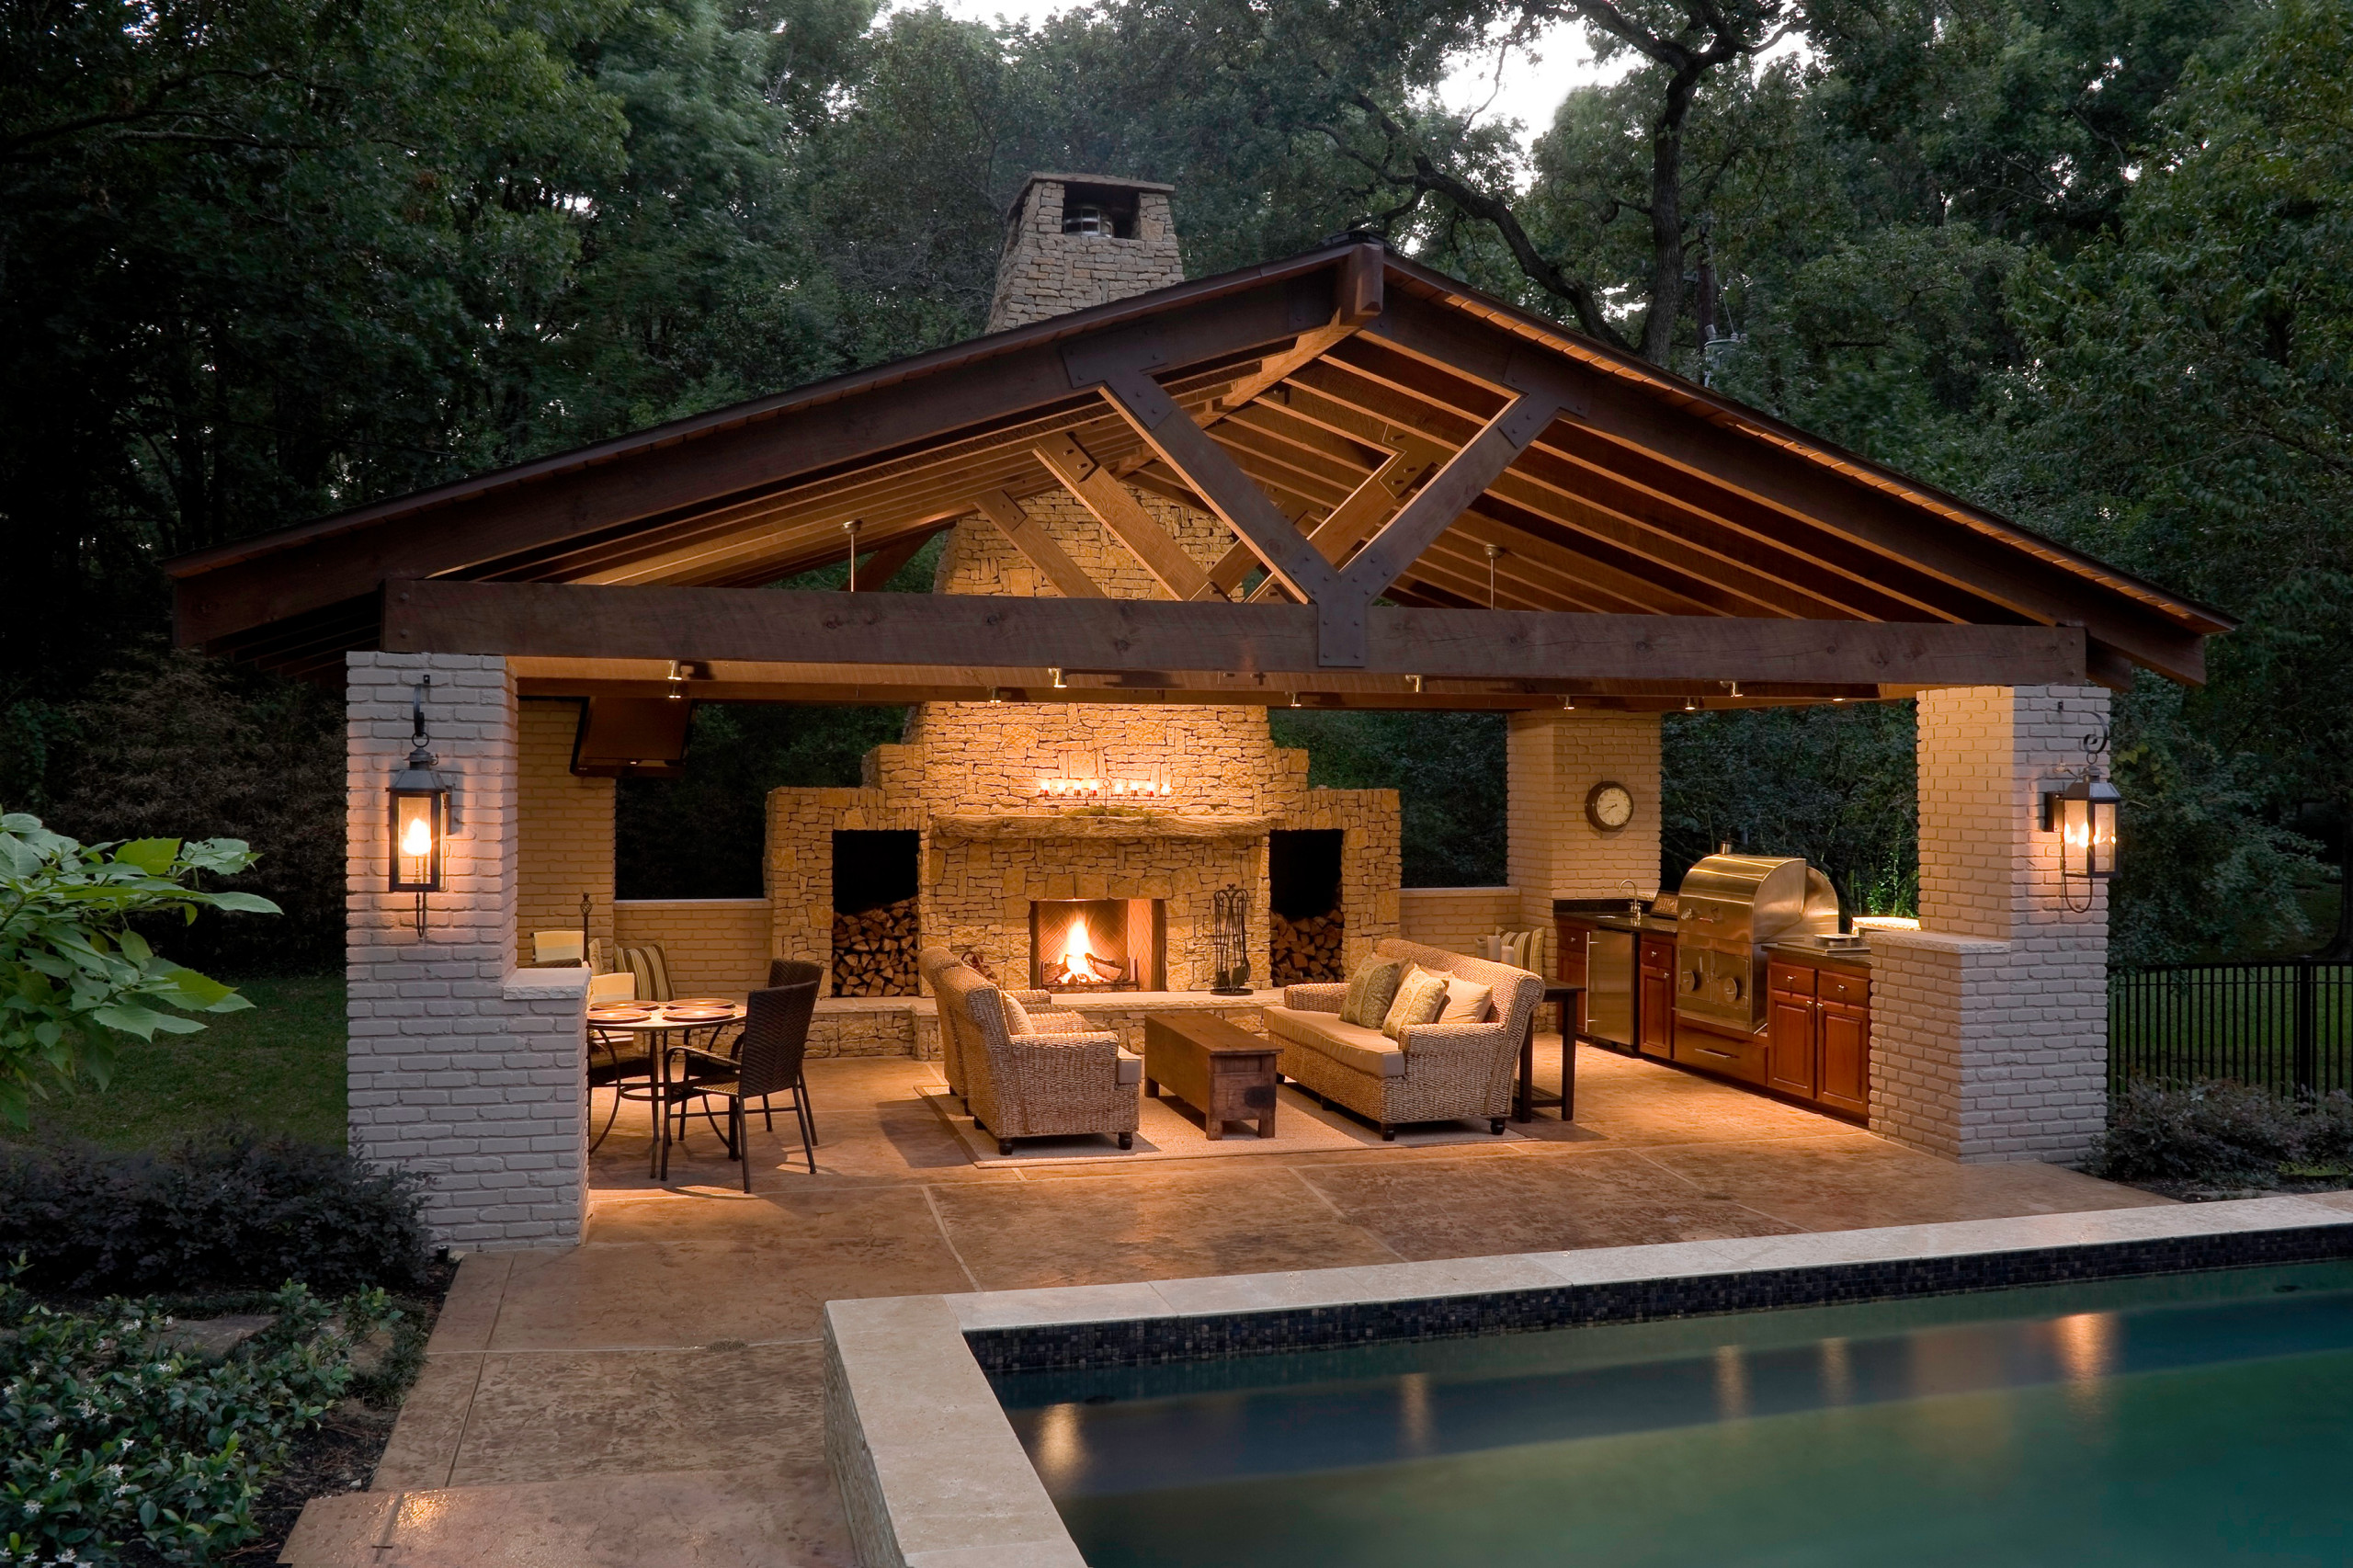 Patio With A Fire Pit And Gazebo, Gazebo With Fire Pit Ideas